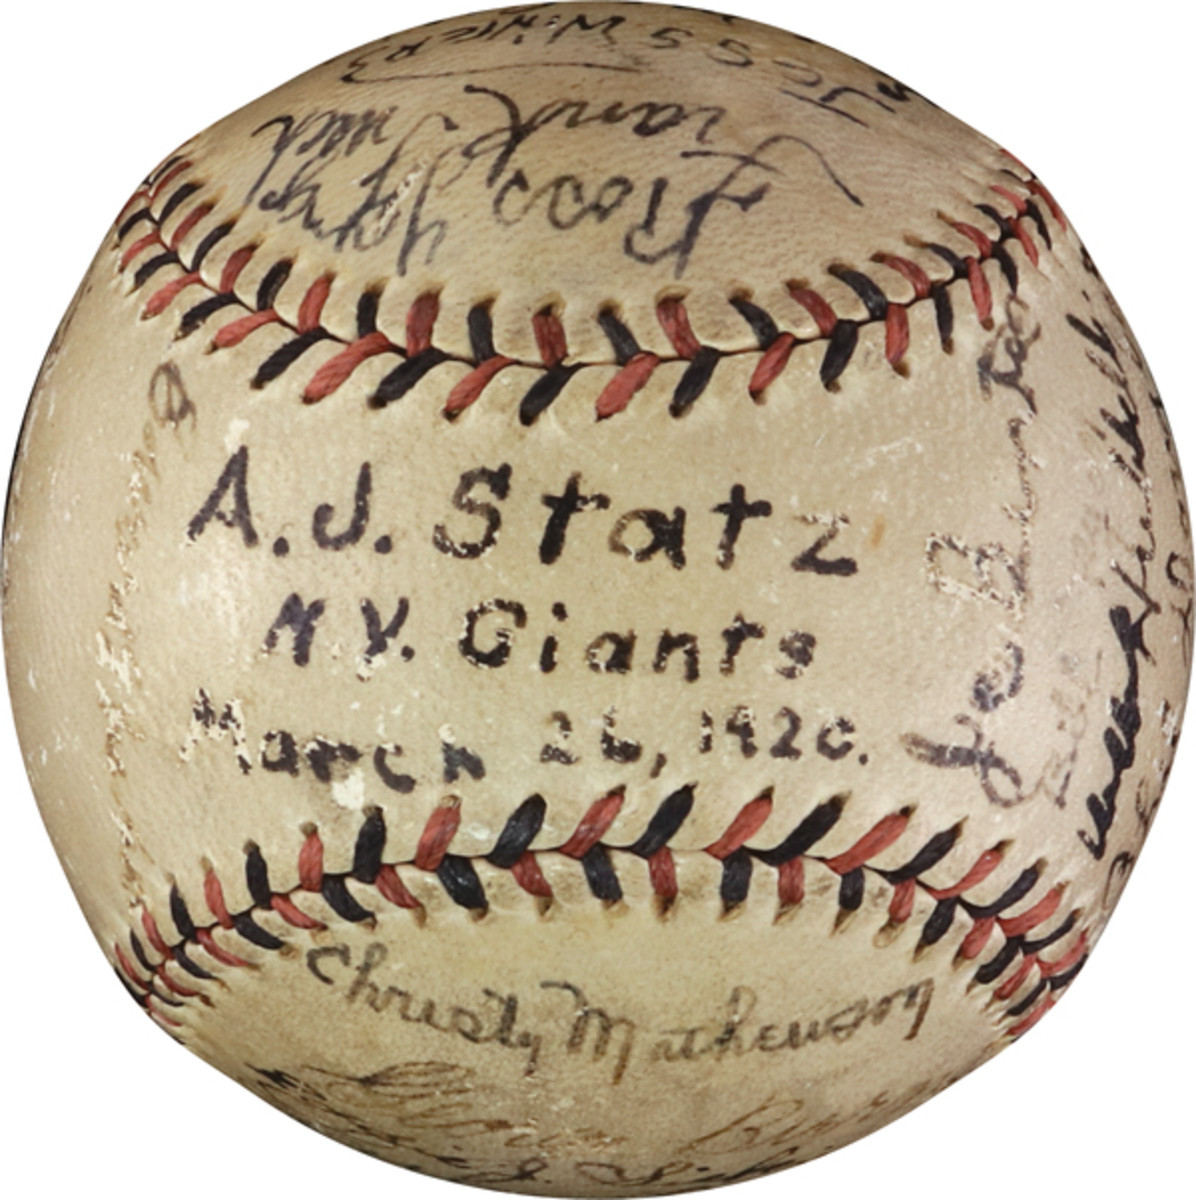 Baseball signed by 25 members of the 1920 New York Giants, including Christy Mathewson.